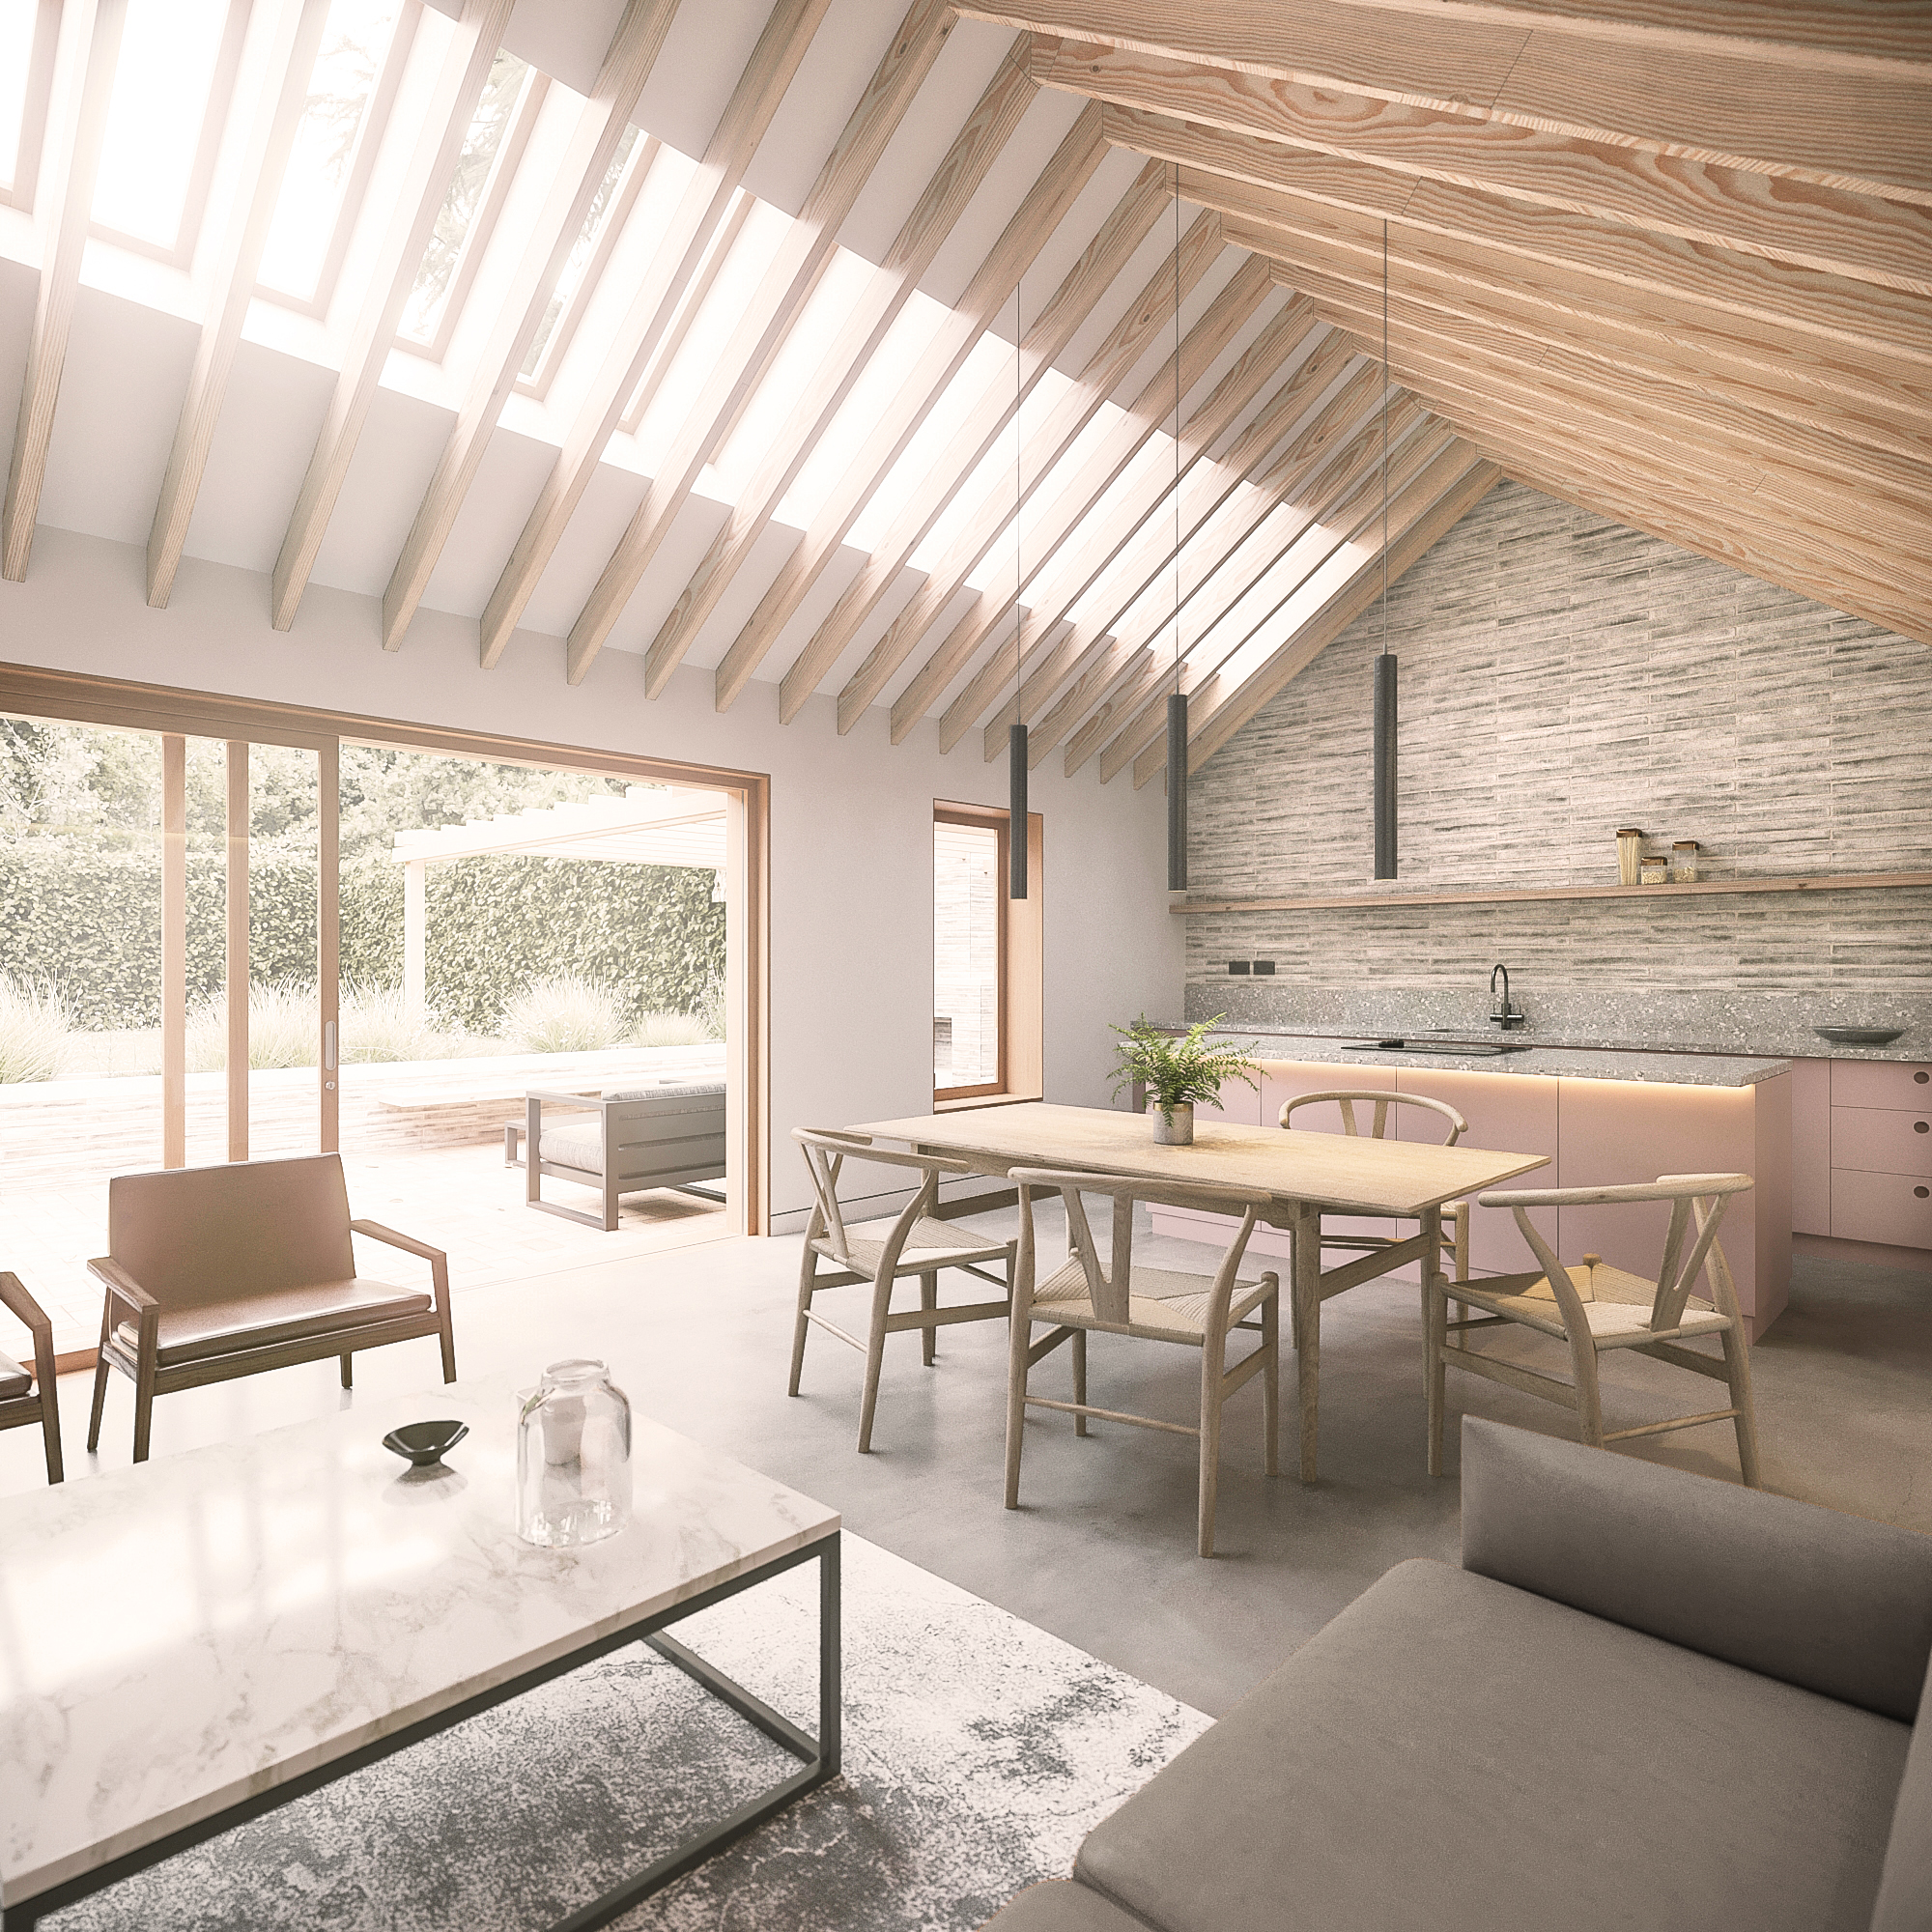 extension architects Surrey